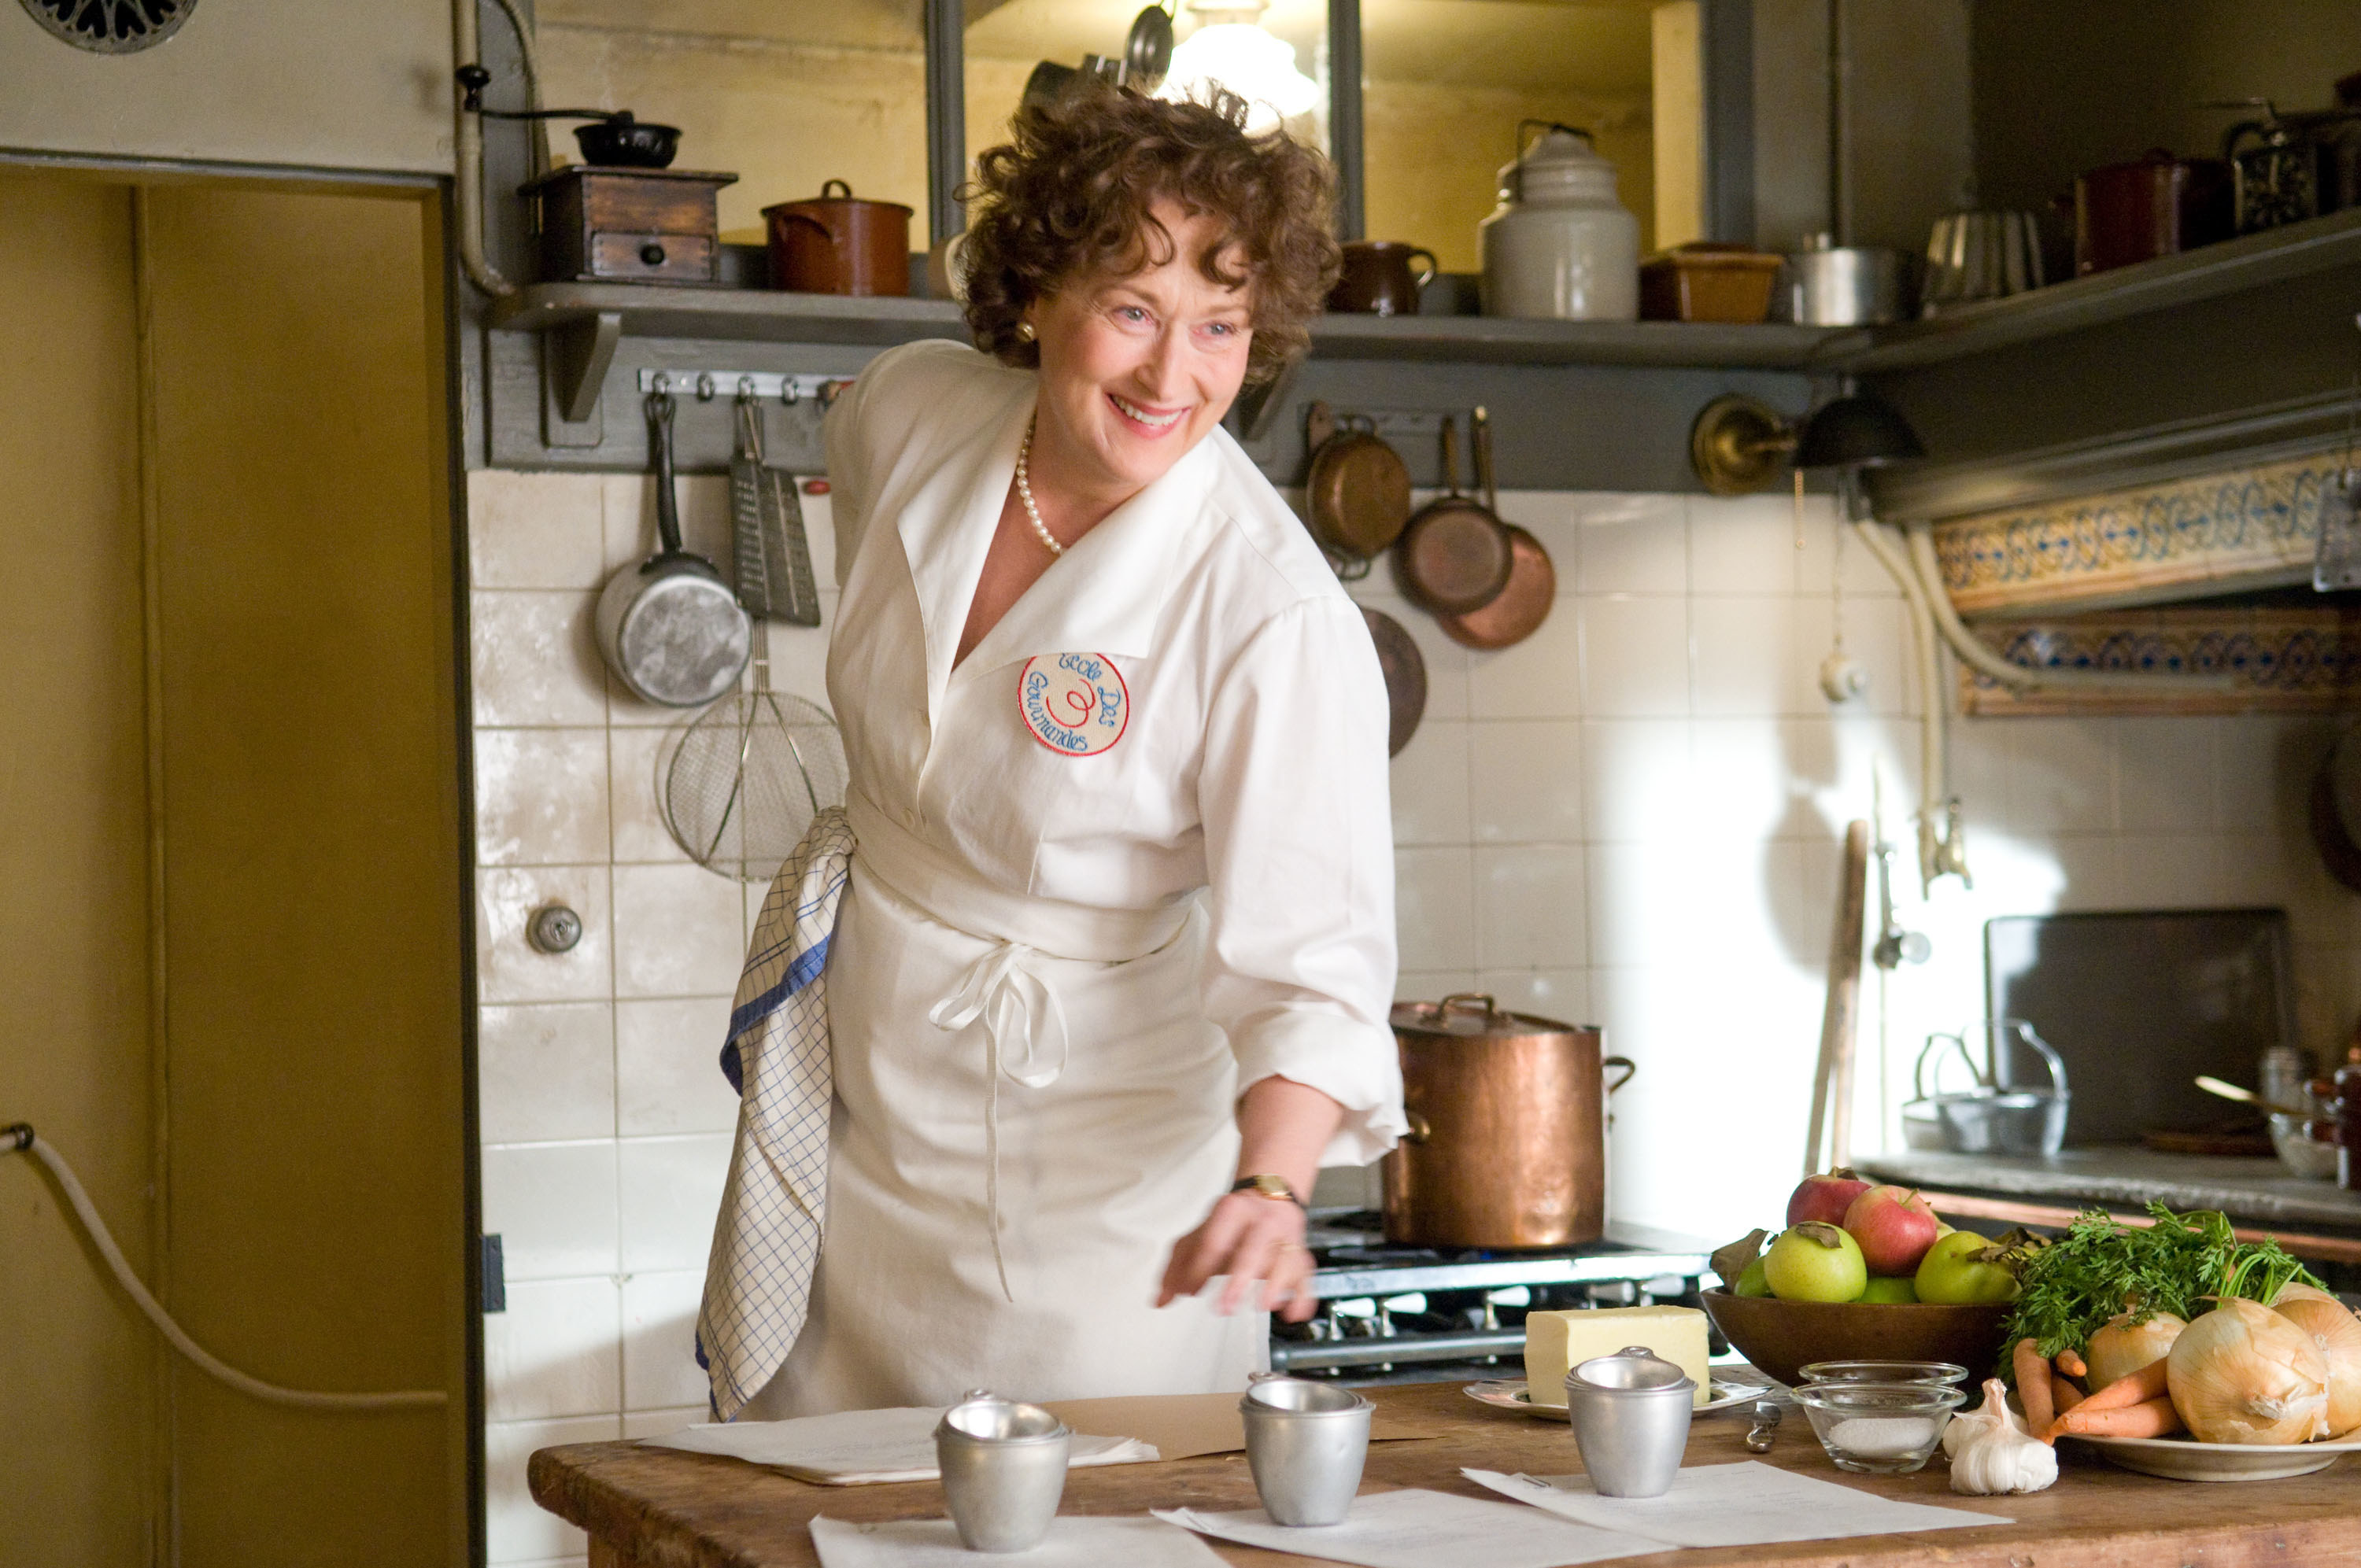 Meryl Streep stands in a kitchen cooking